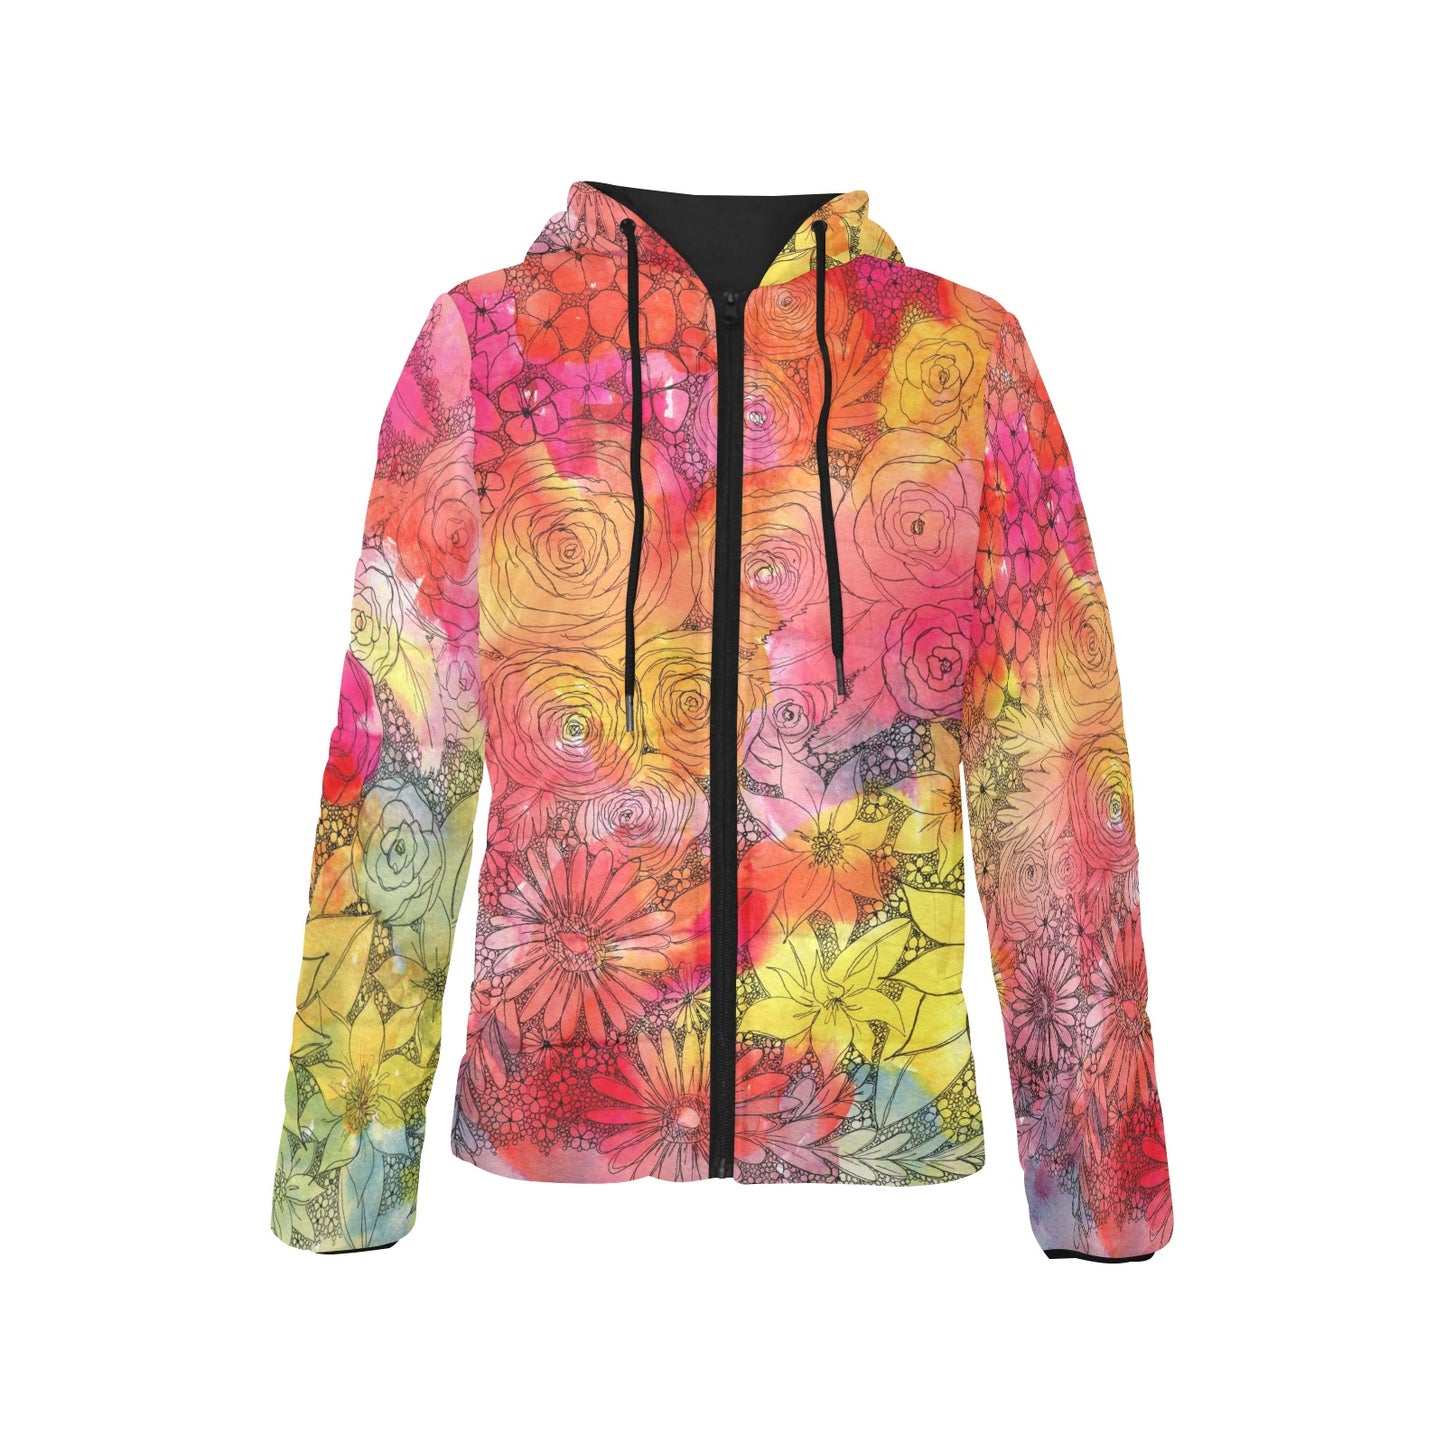 Inked Floral - Women's Padded Hooded Jacket